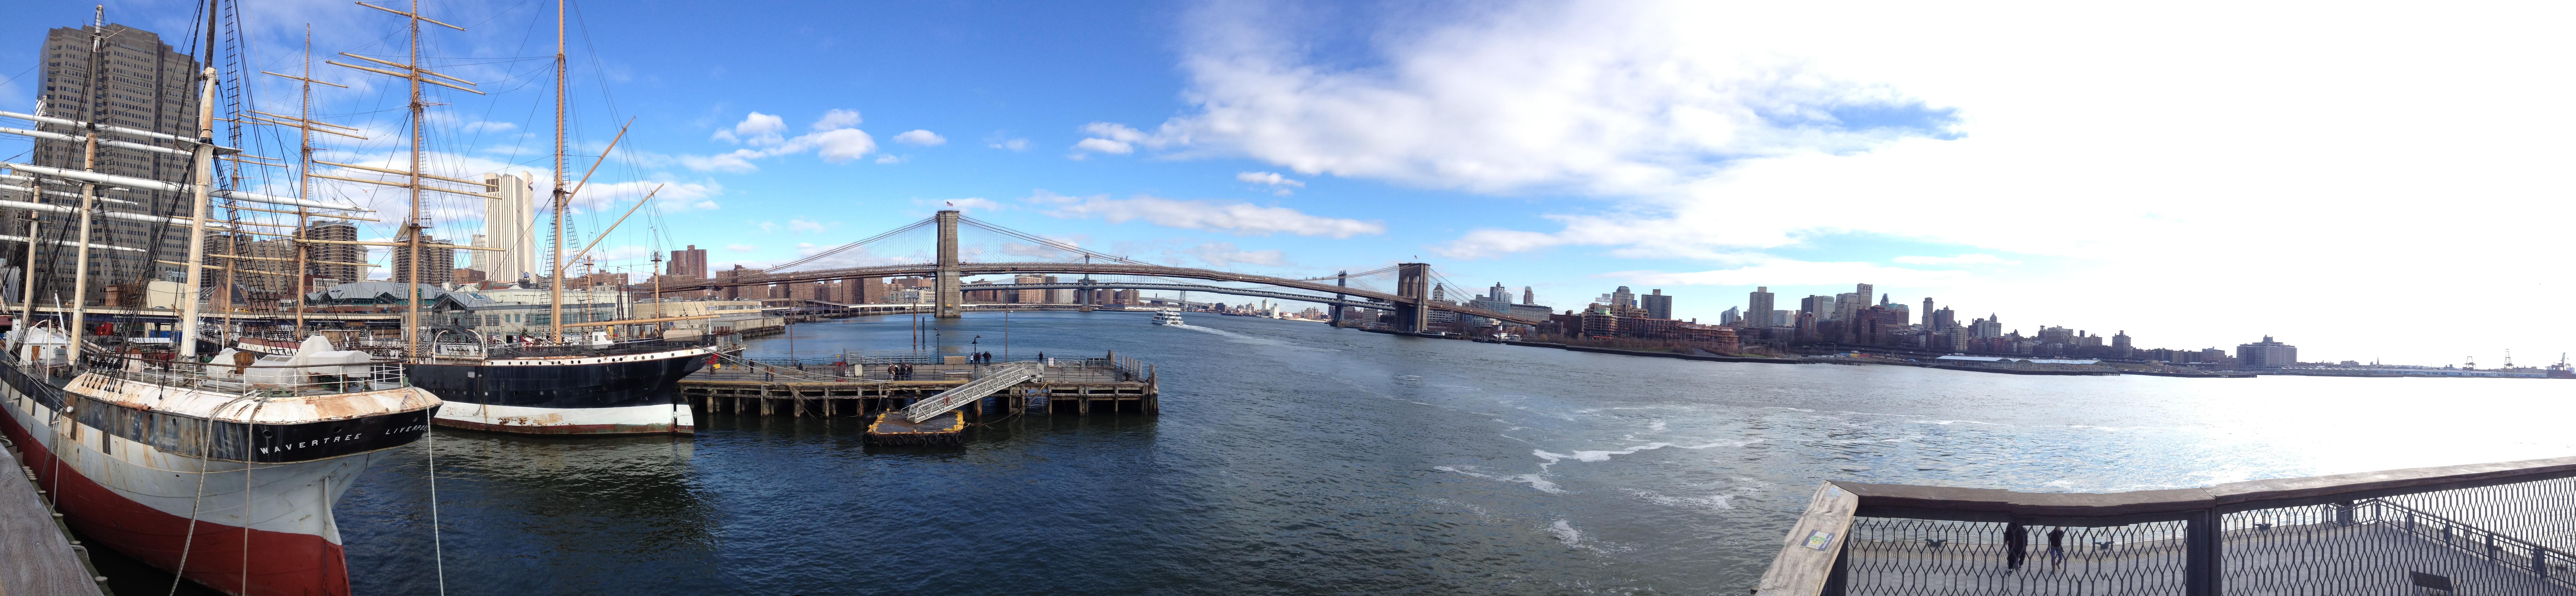 From the pier 17, view on the pier 15 and its historic ships, an extension of the South Street Seaport Museum.